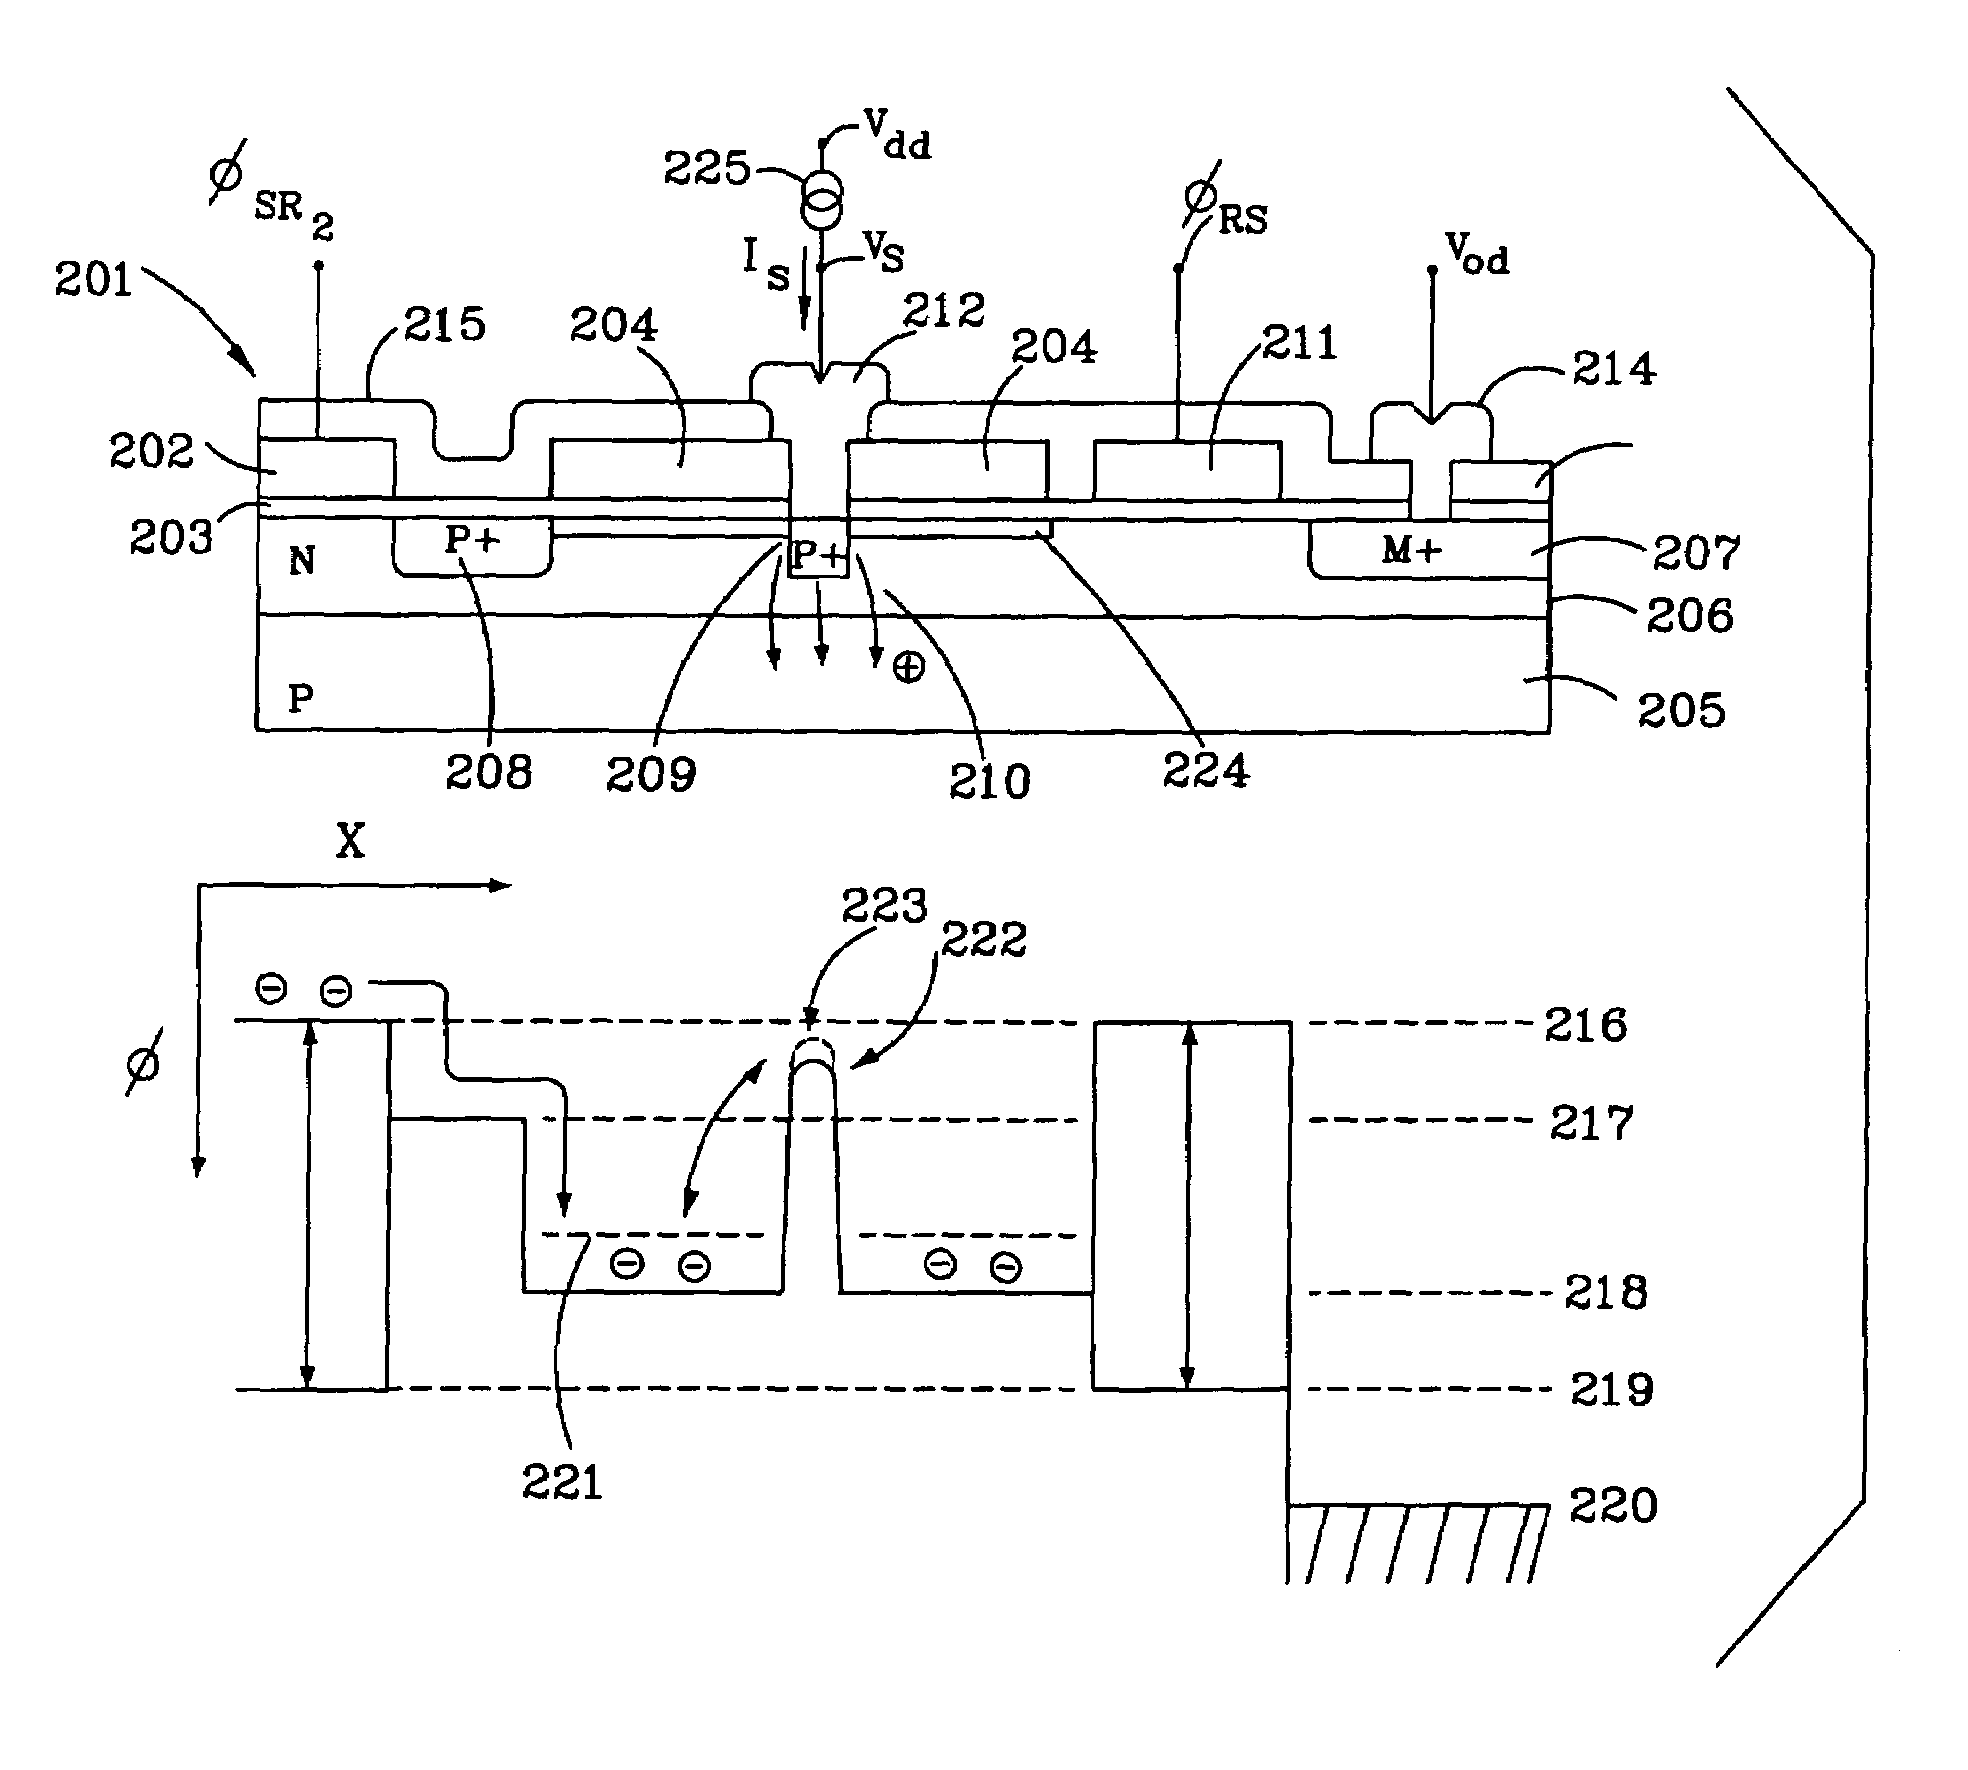 Gated vertical punch through device used as a high performance charge detection amplifier